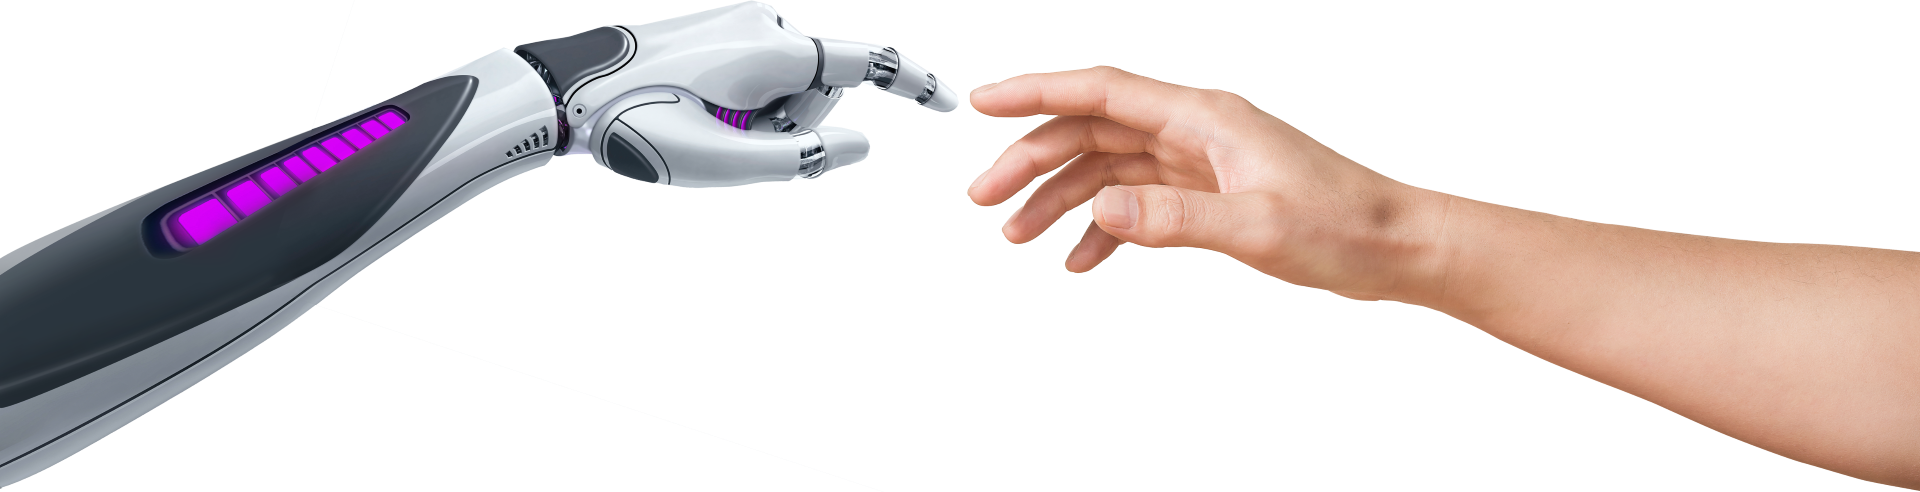 A robotic and a human hand reaching towards each other and almost touching